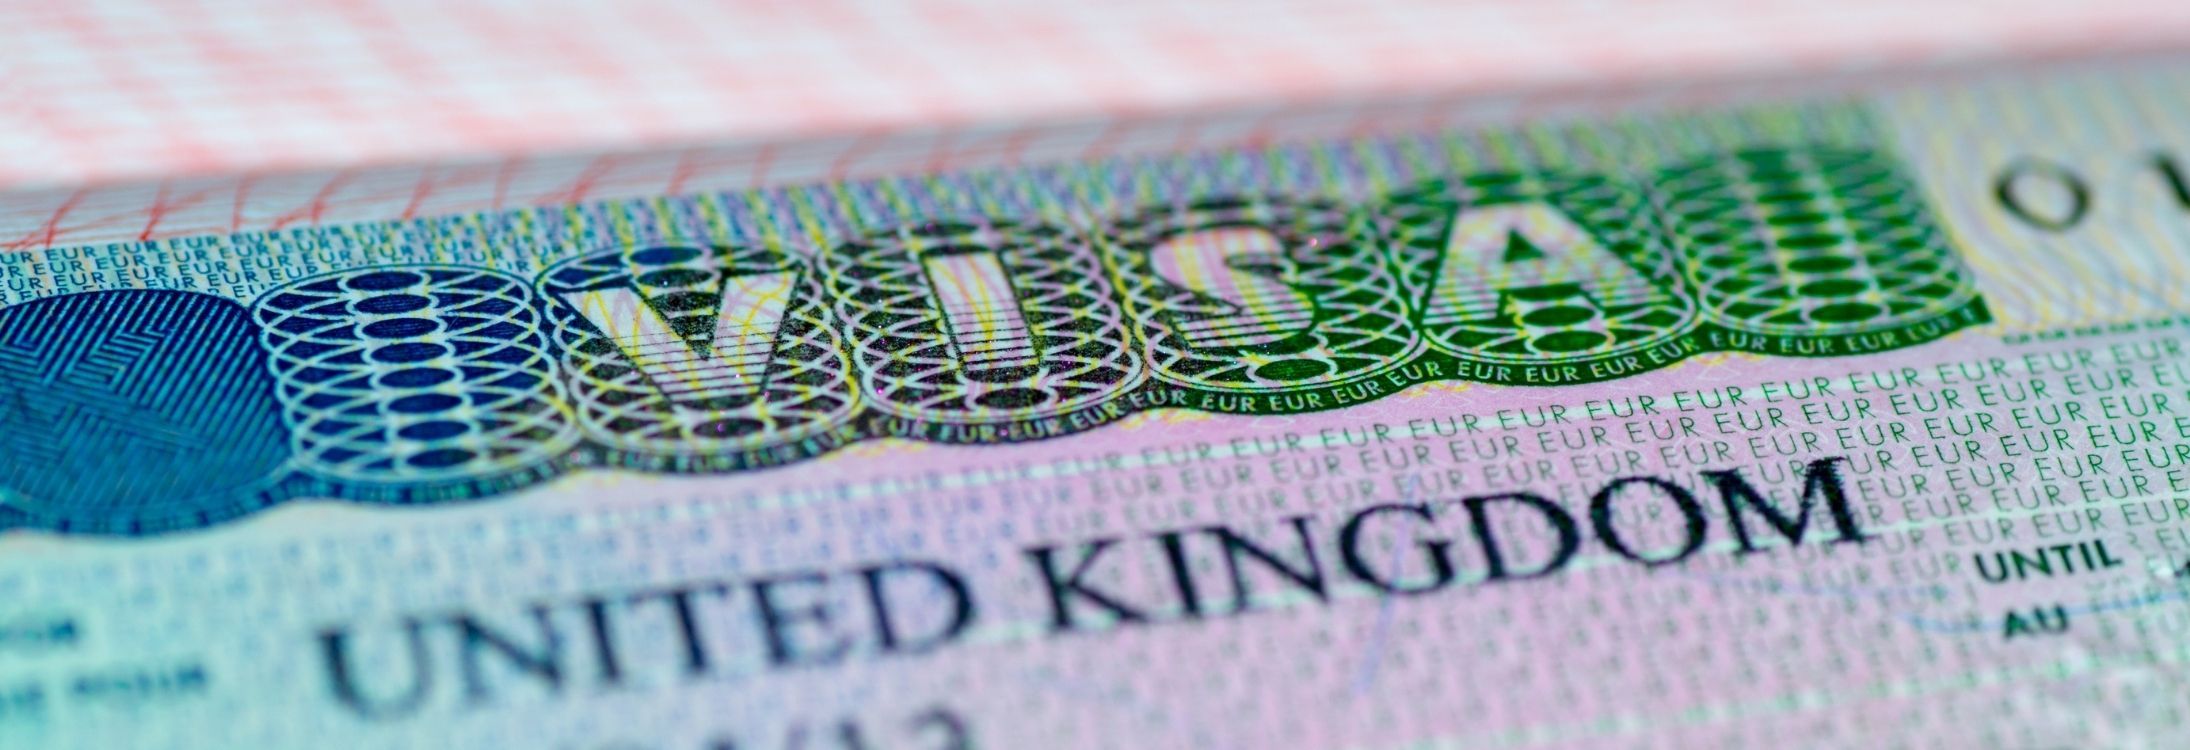 Your pocket guide to getting a UK visa